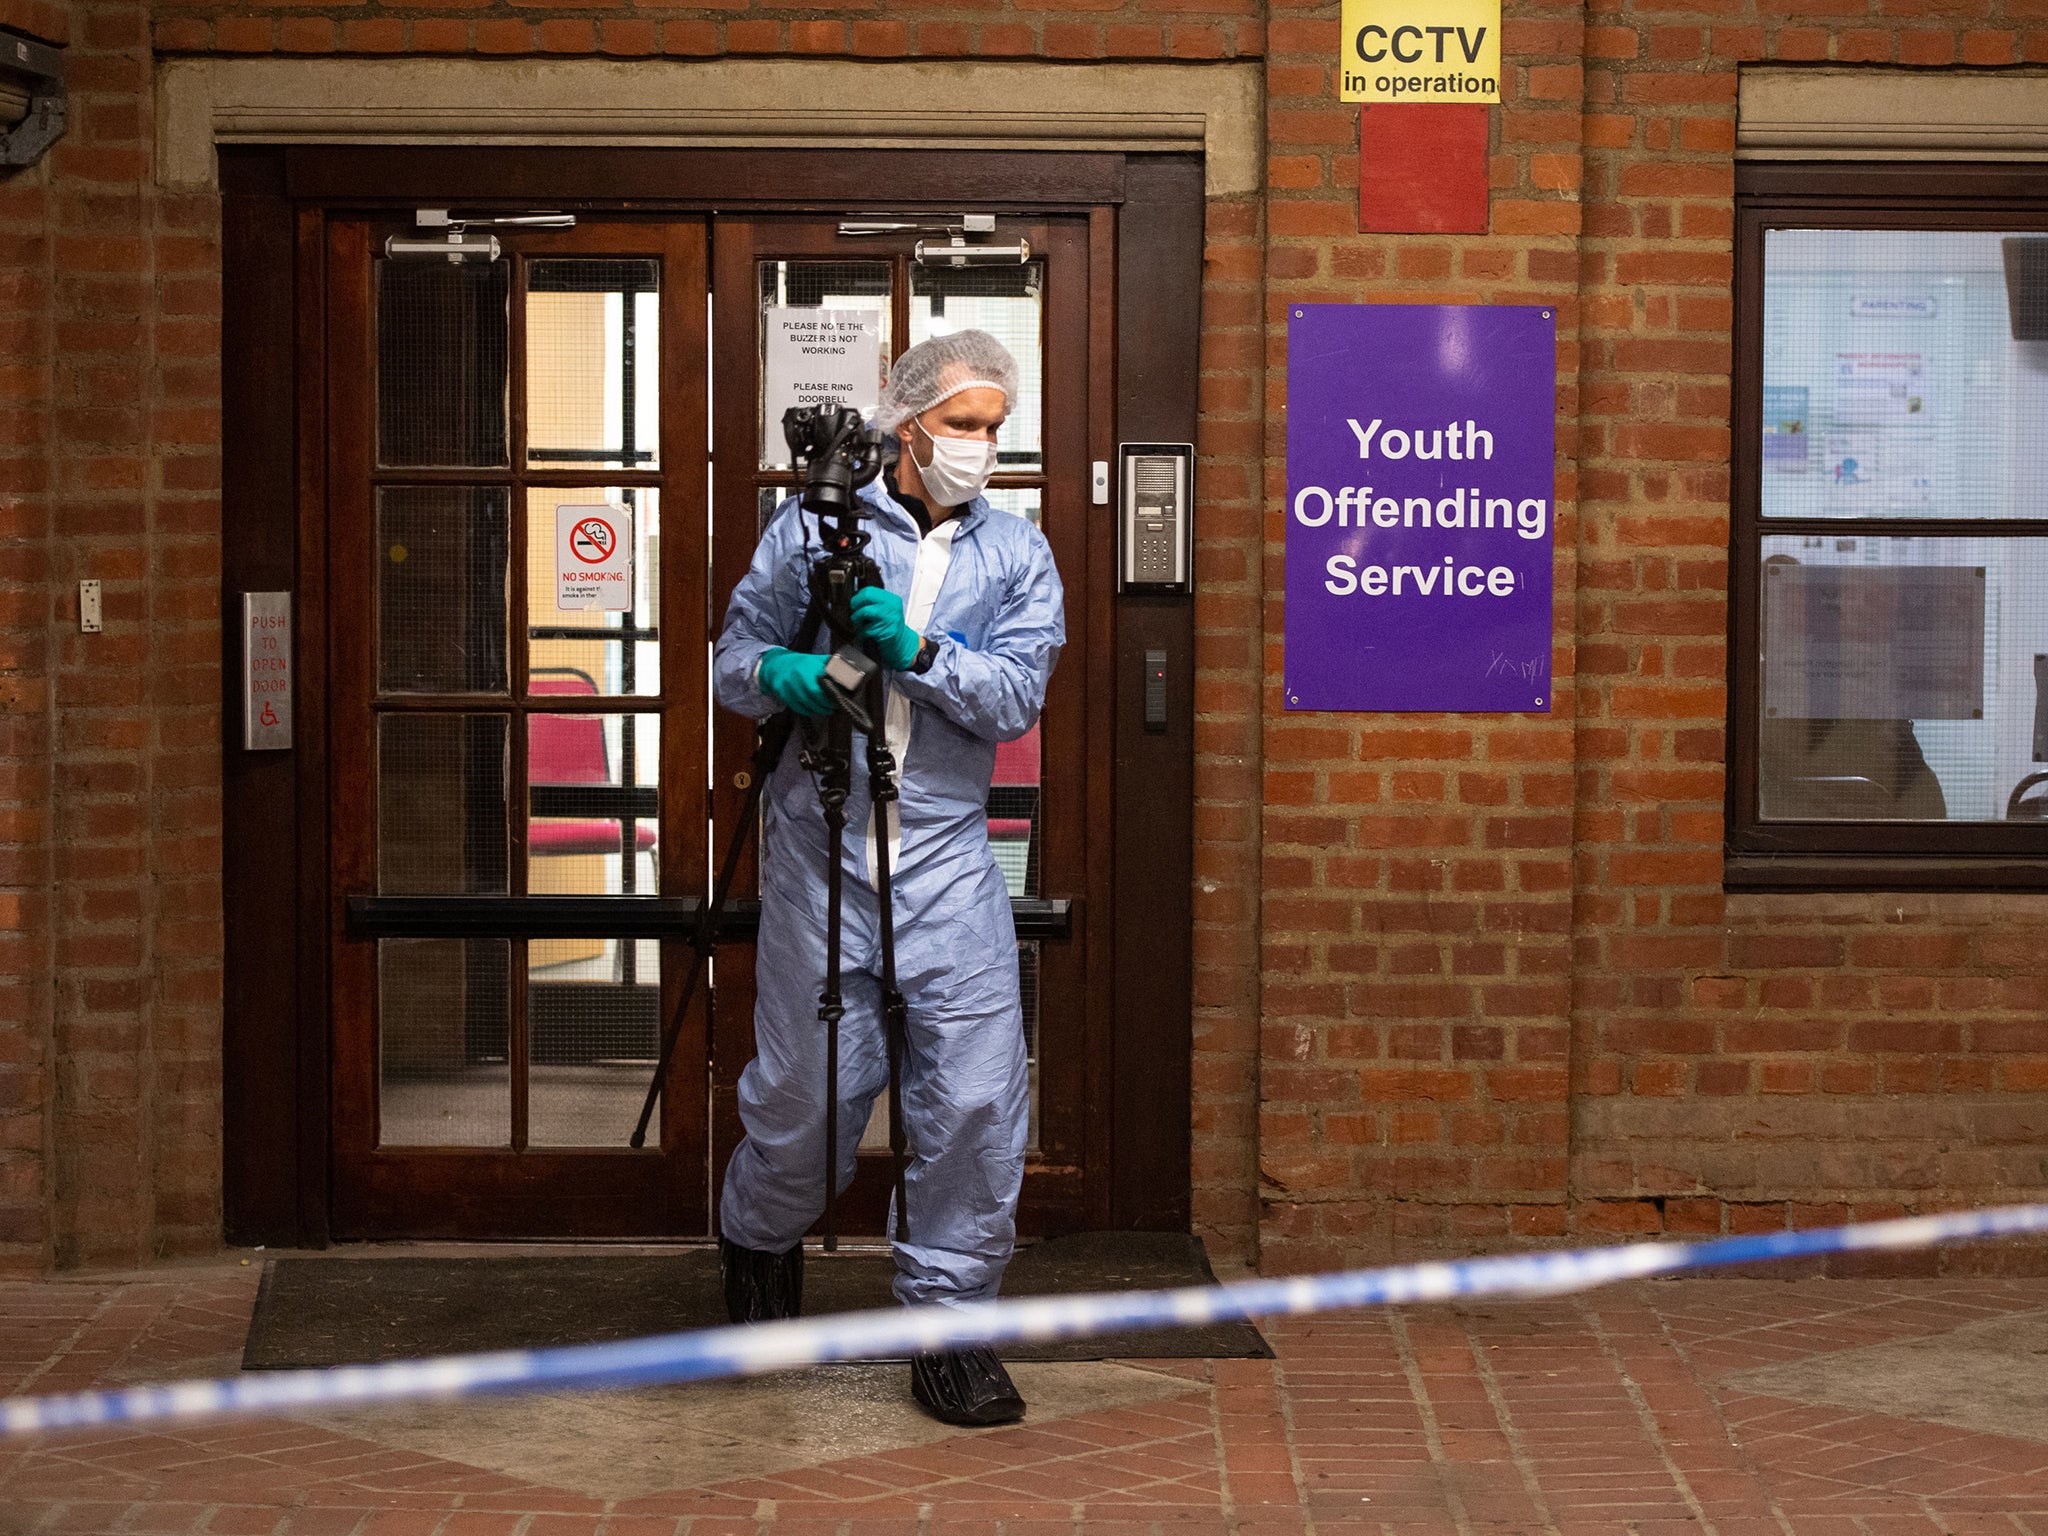 Police forensics officers at the scene civic centre building in Uxbridge, west London, following the stabbing of a teenager in the chest